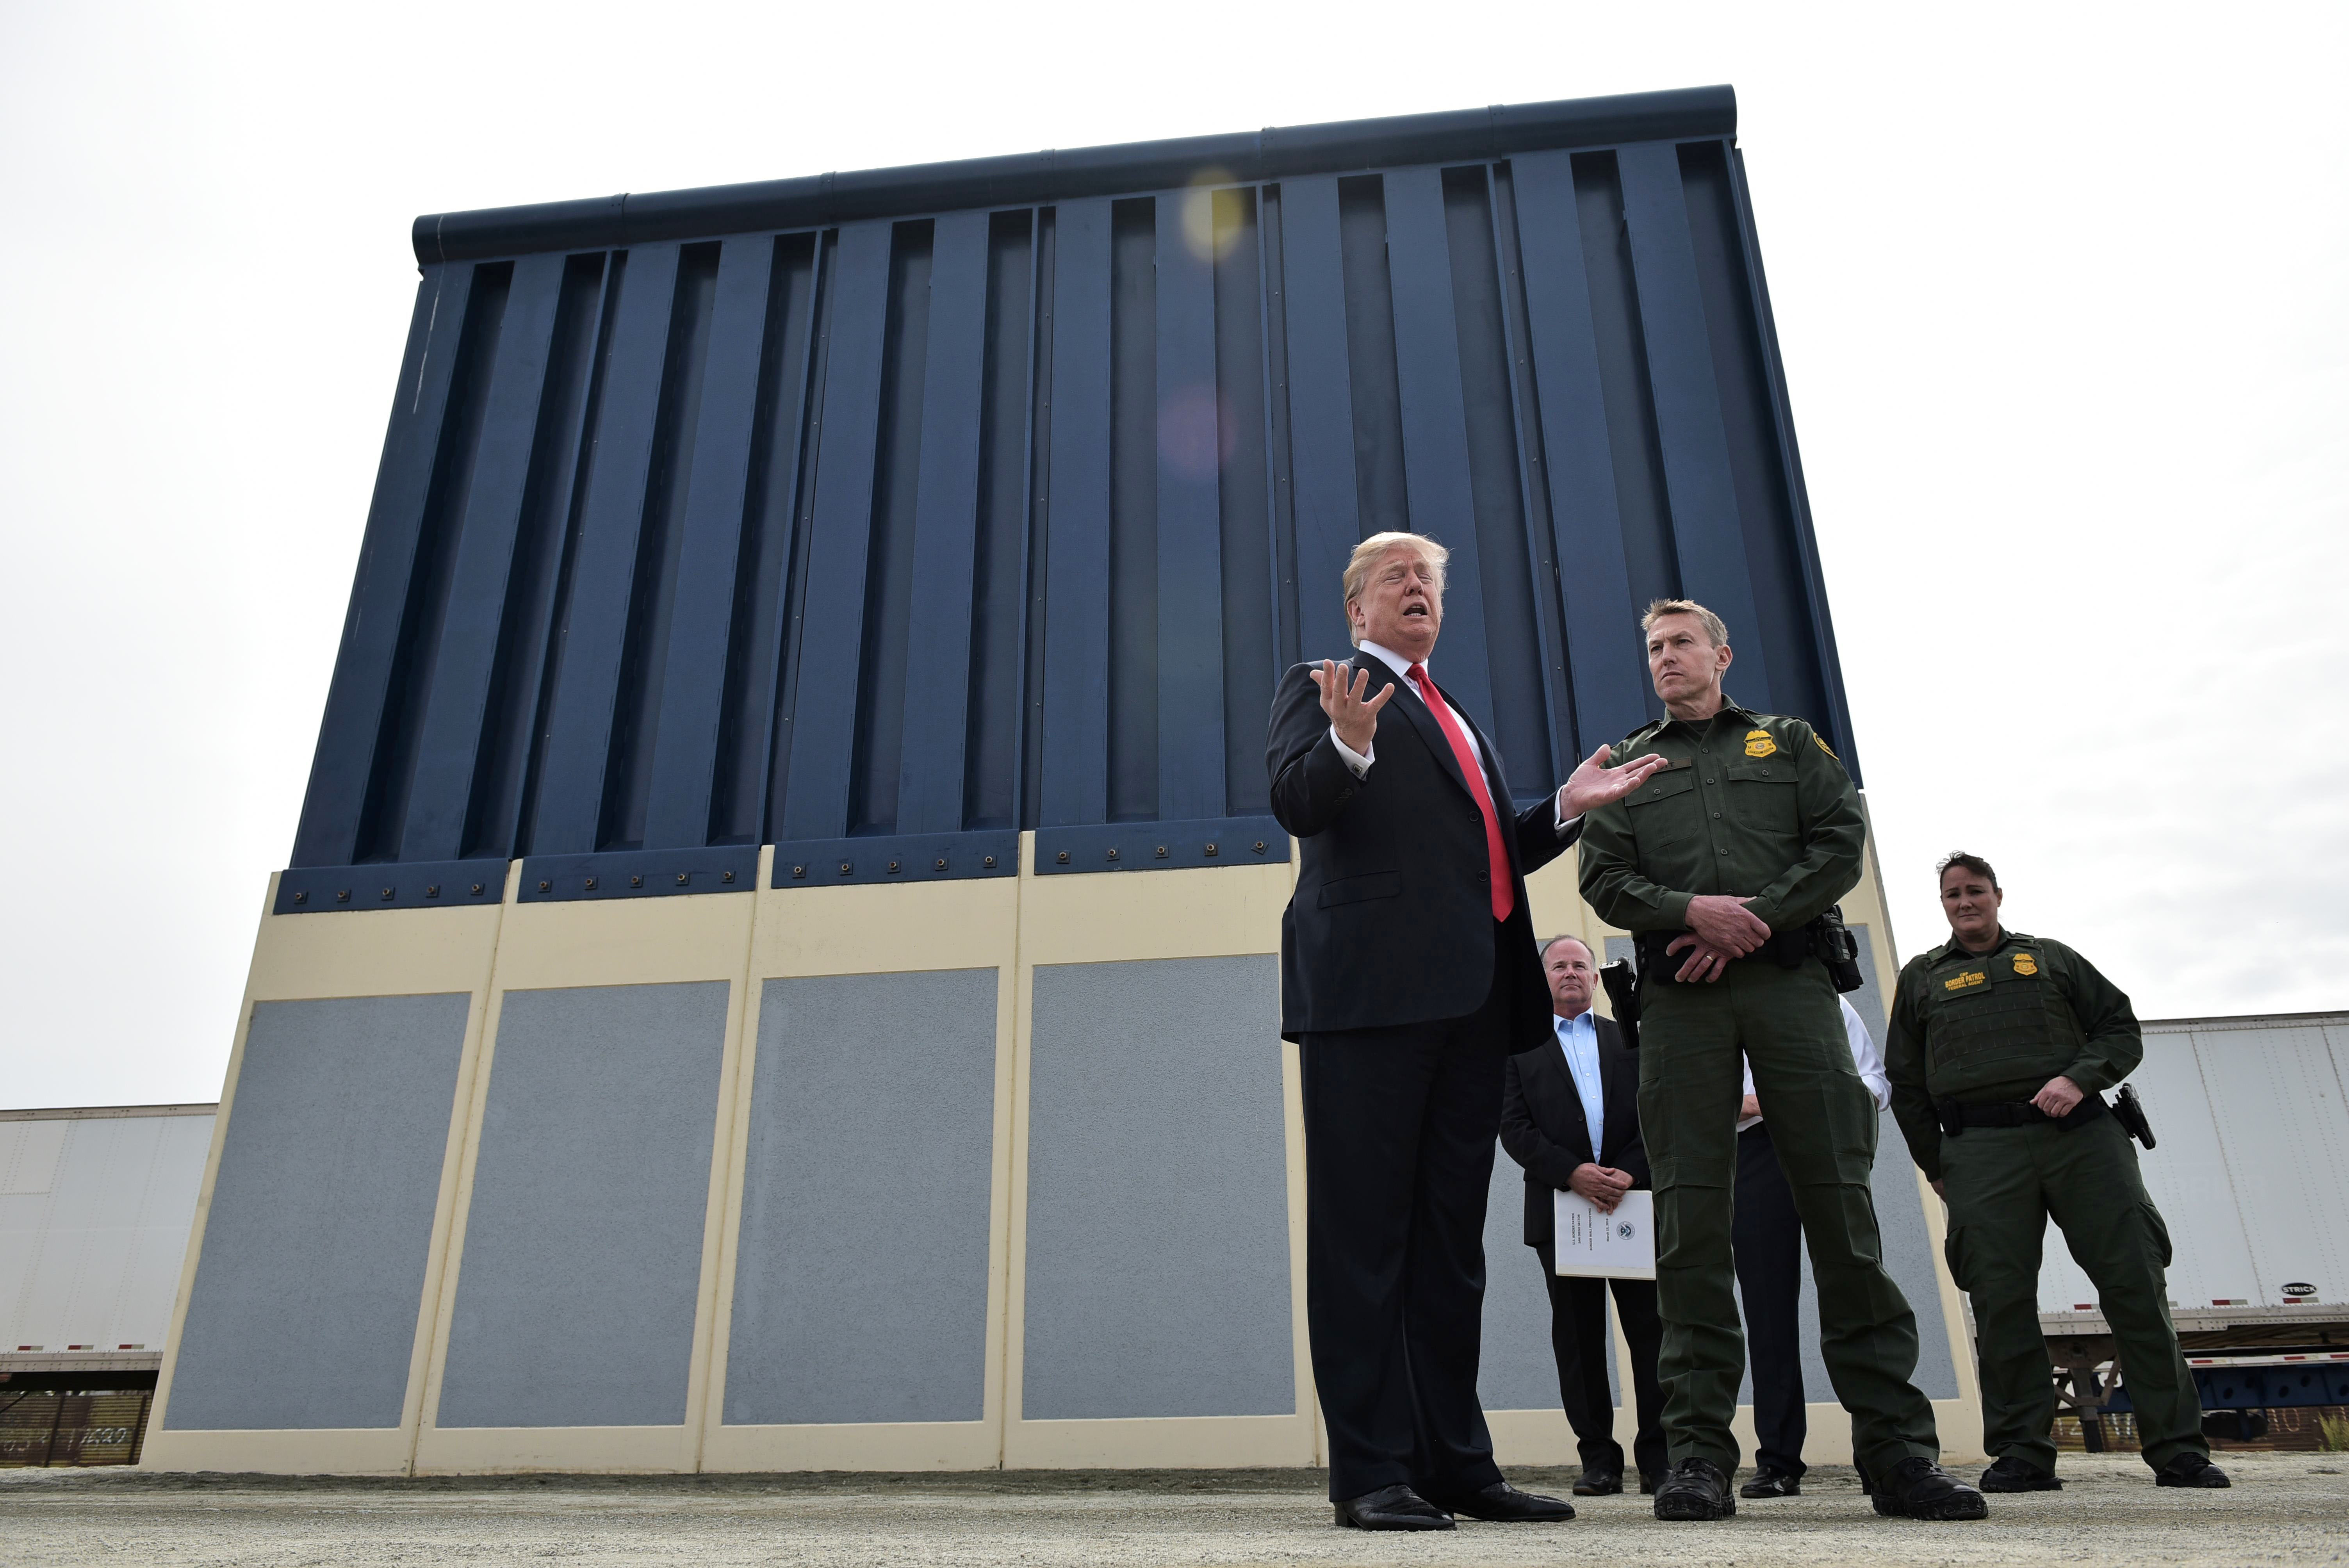 US President Donald Trump speaks as he inspects border wall prototypes in San Diego, California on March 13, 2018. MANDEL NGAN/AFP/Getty Images 